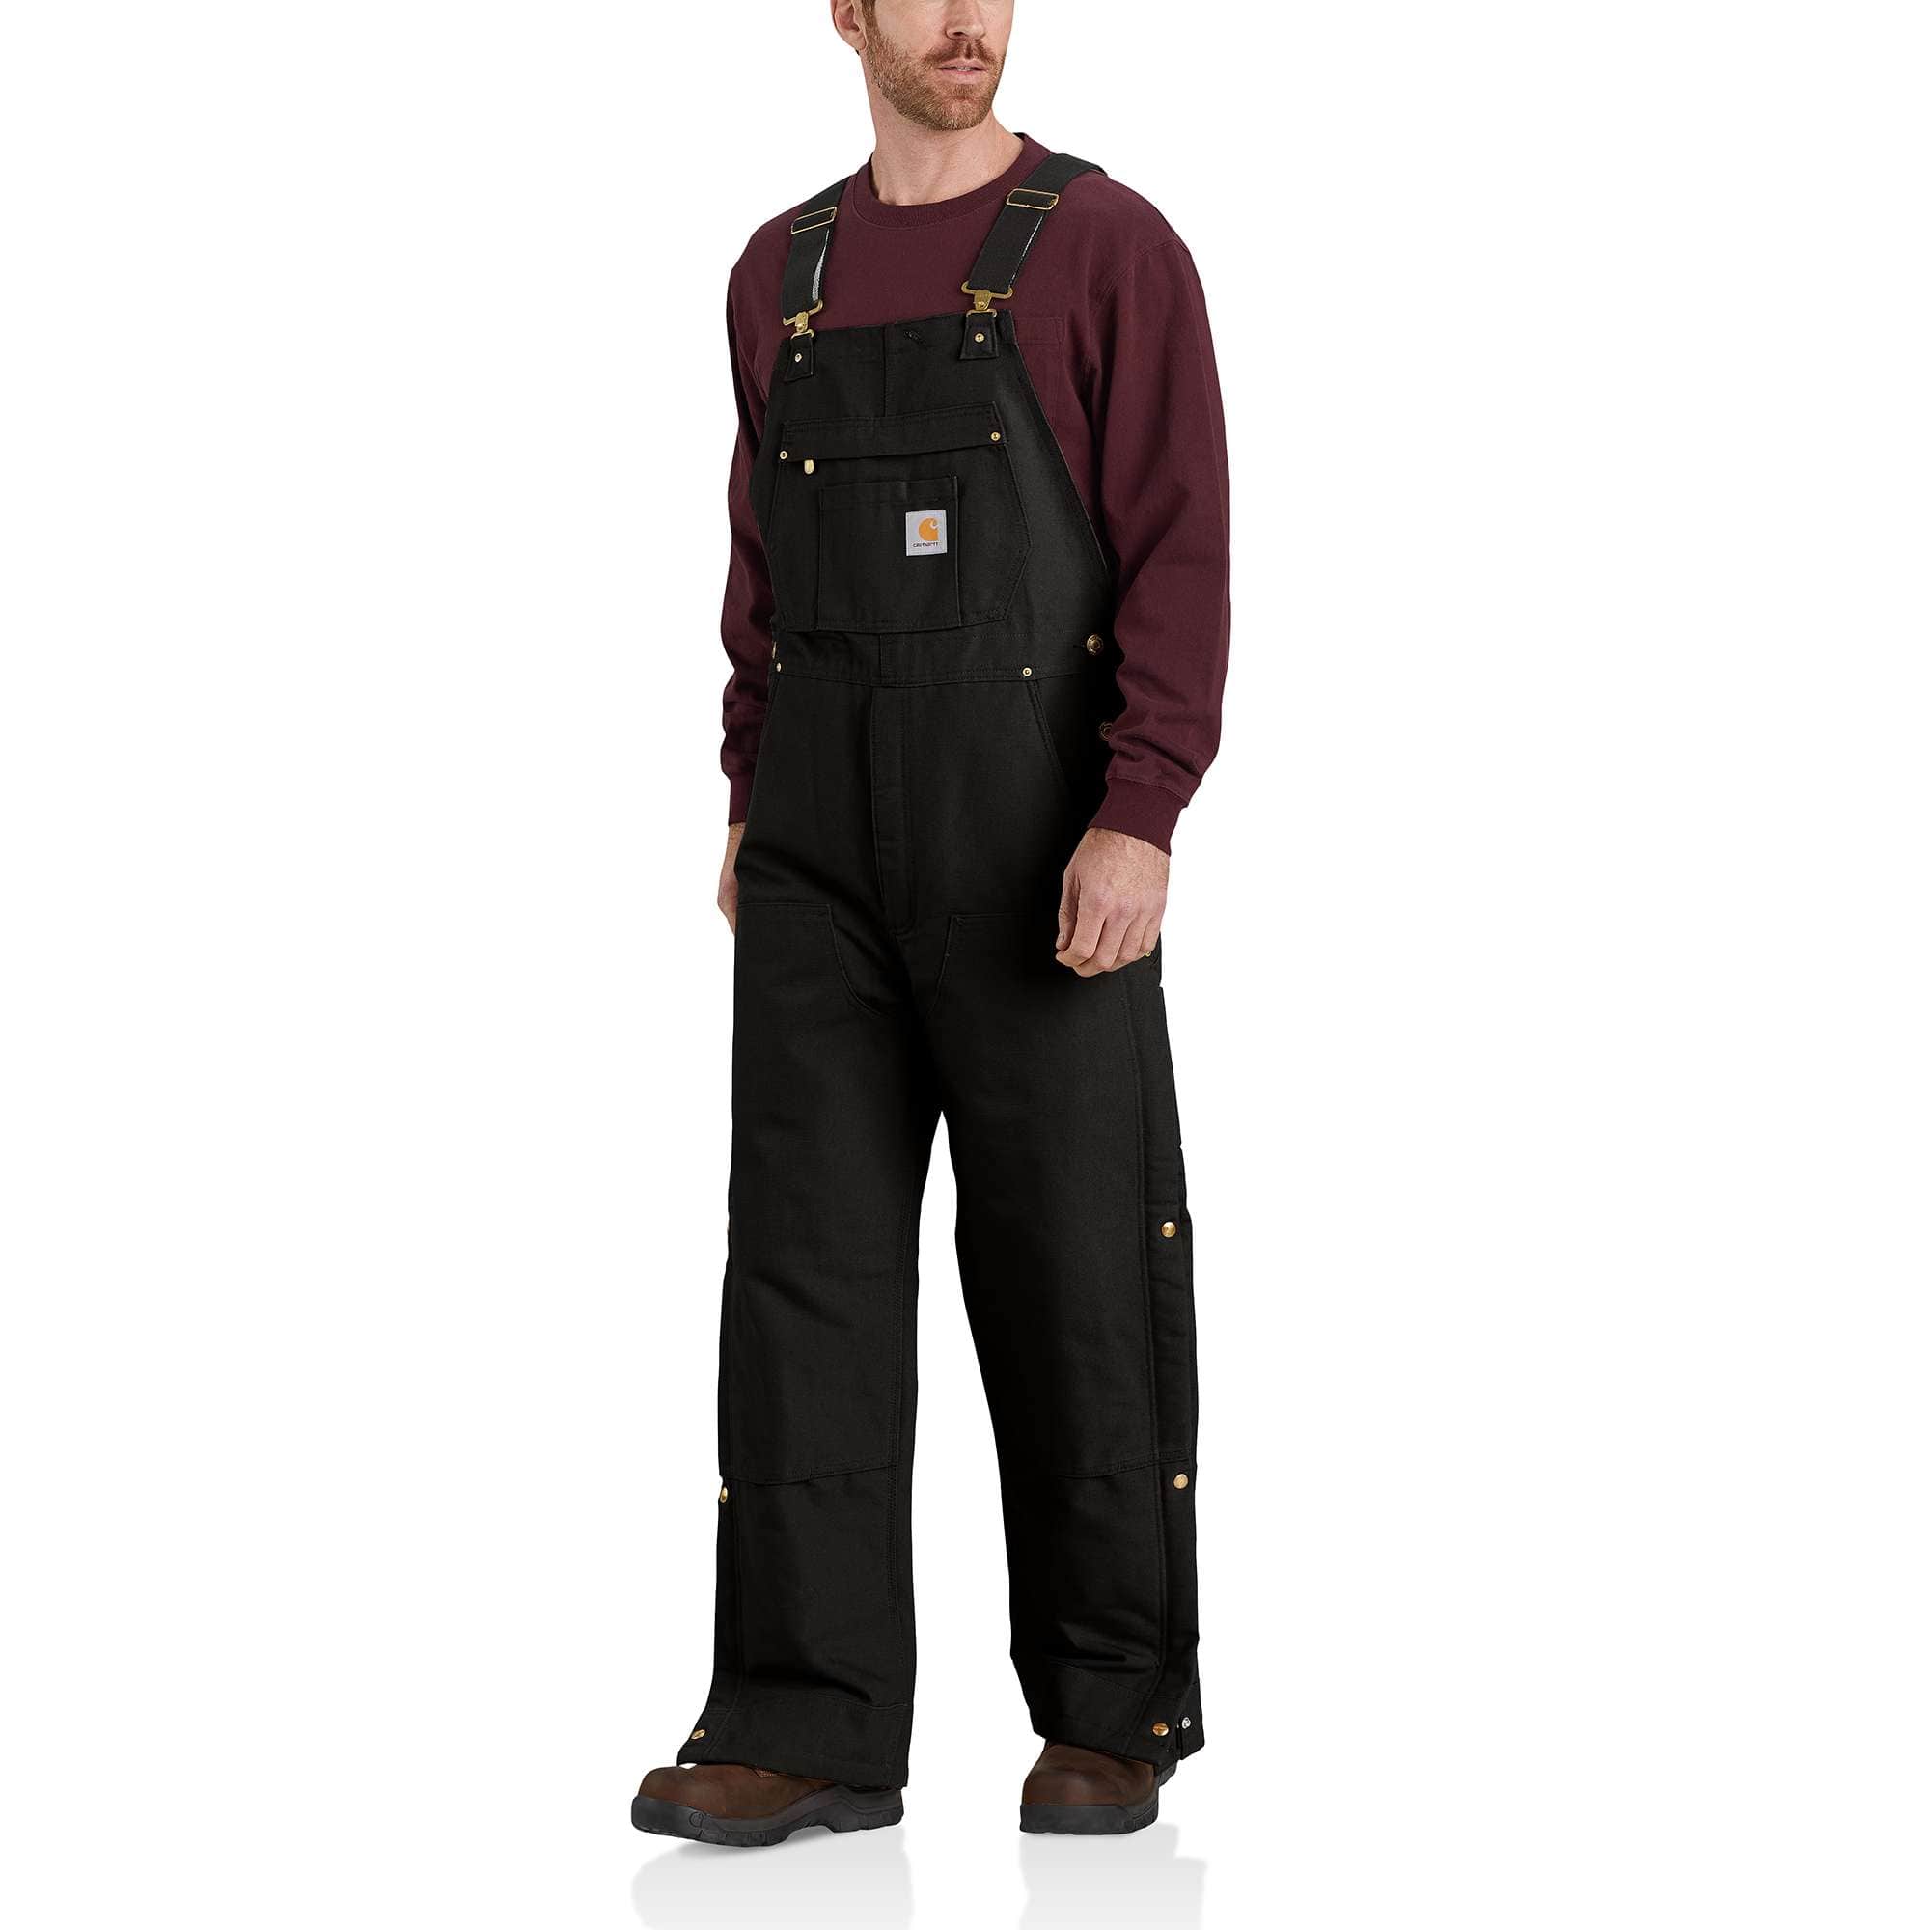 Work Bib Overalls Men Women Plus Size Safety Protective Jumpsuits with  Pockets Labor Uniforms Sleeveless Coveralls Pants